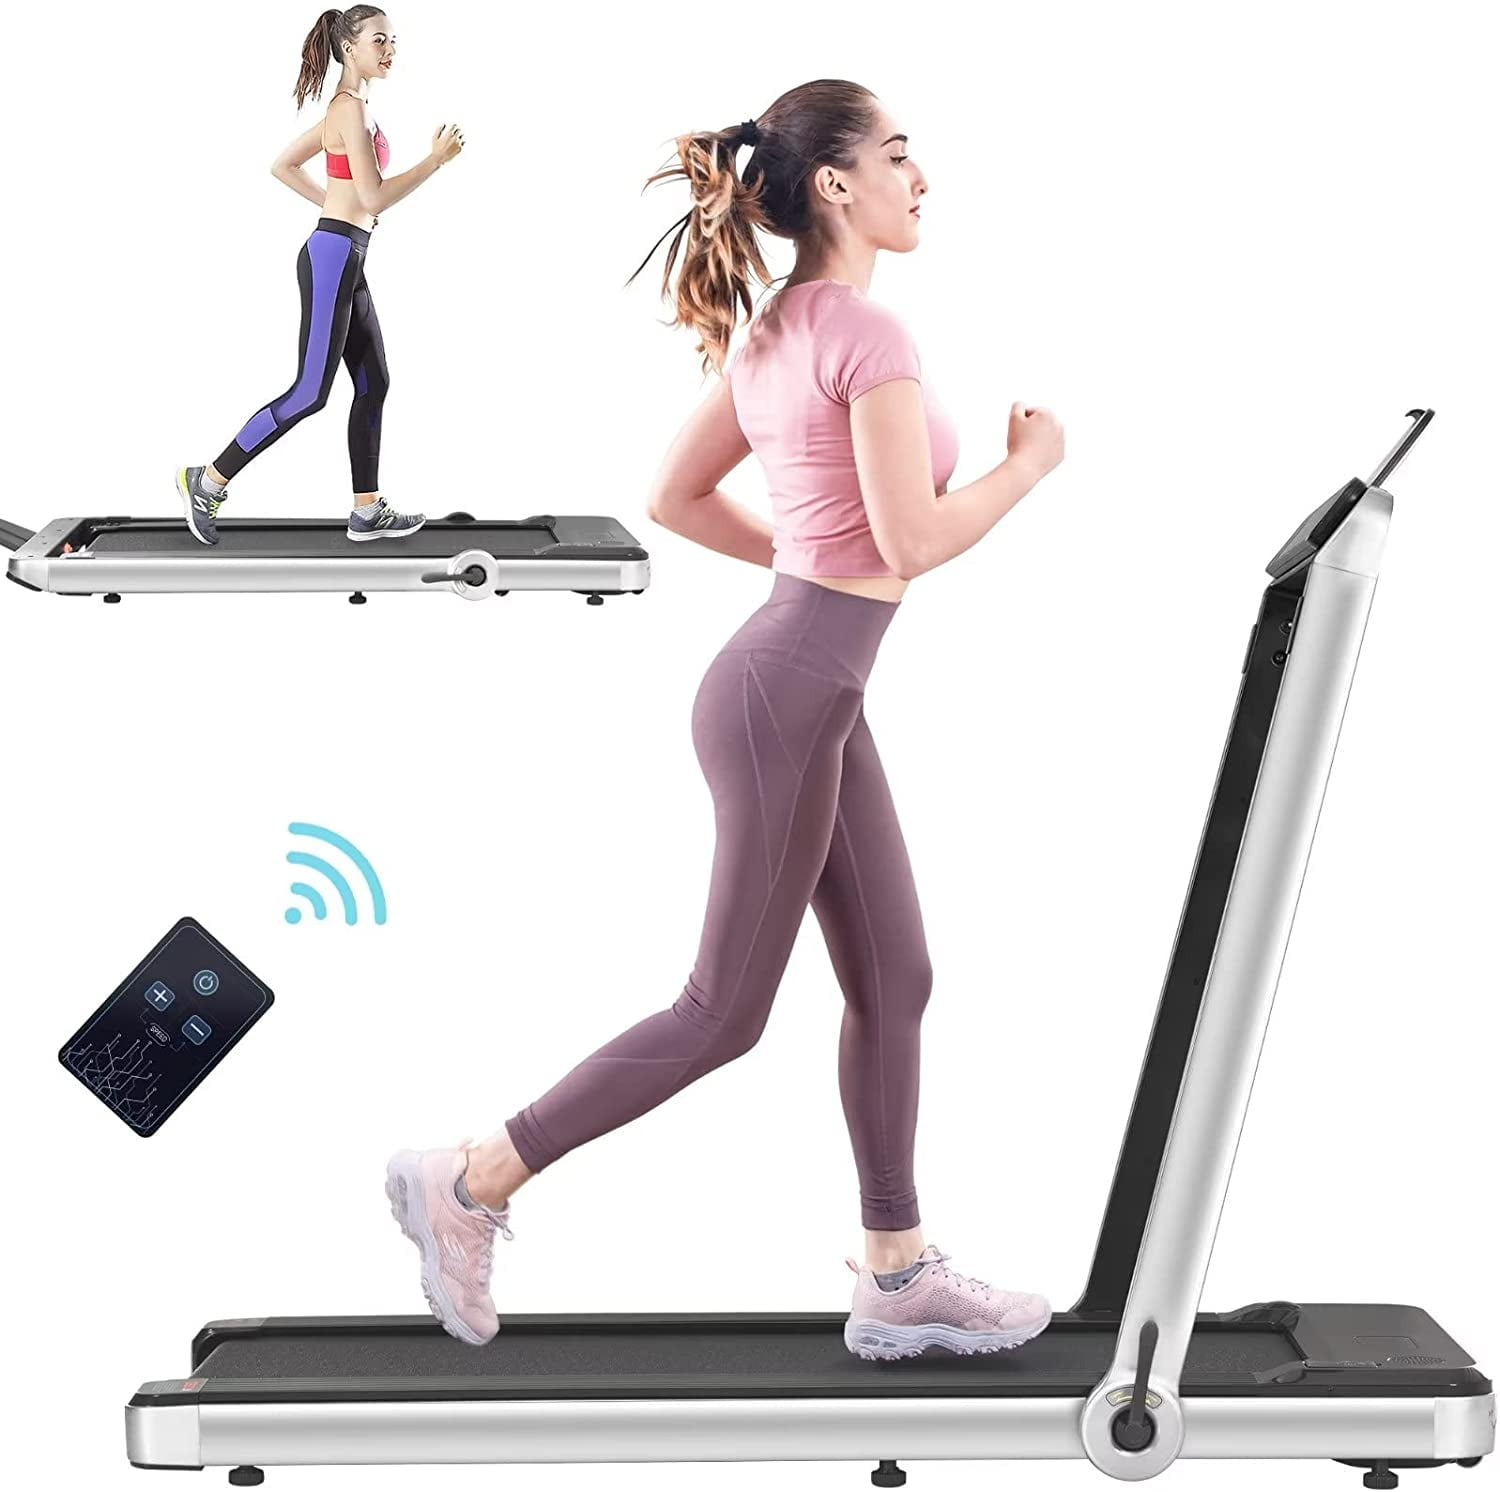 Installation-Free with Remote Control APP Control and LED Display Jogging Walking Exercise Fitness Machine for Family & Office Use- 2022 Updated Version ANCHEER 2 in 1 Under Desk Treadmill 